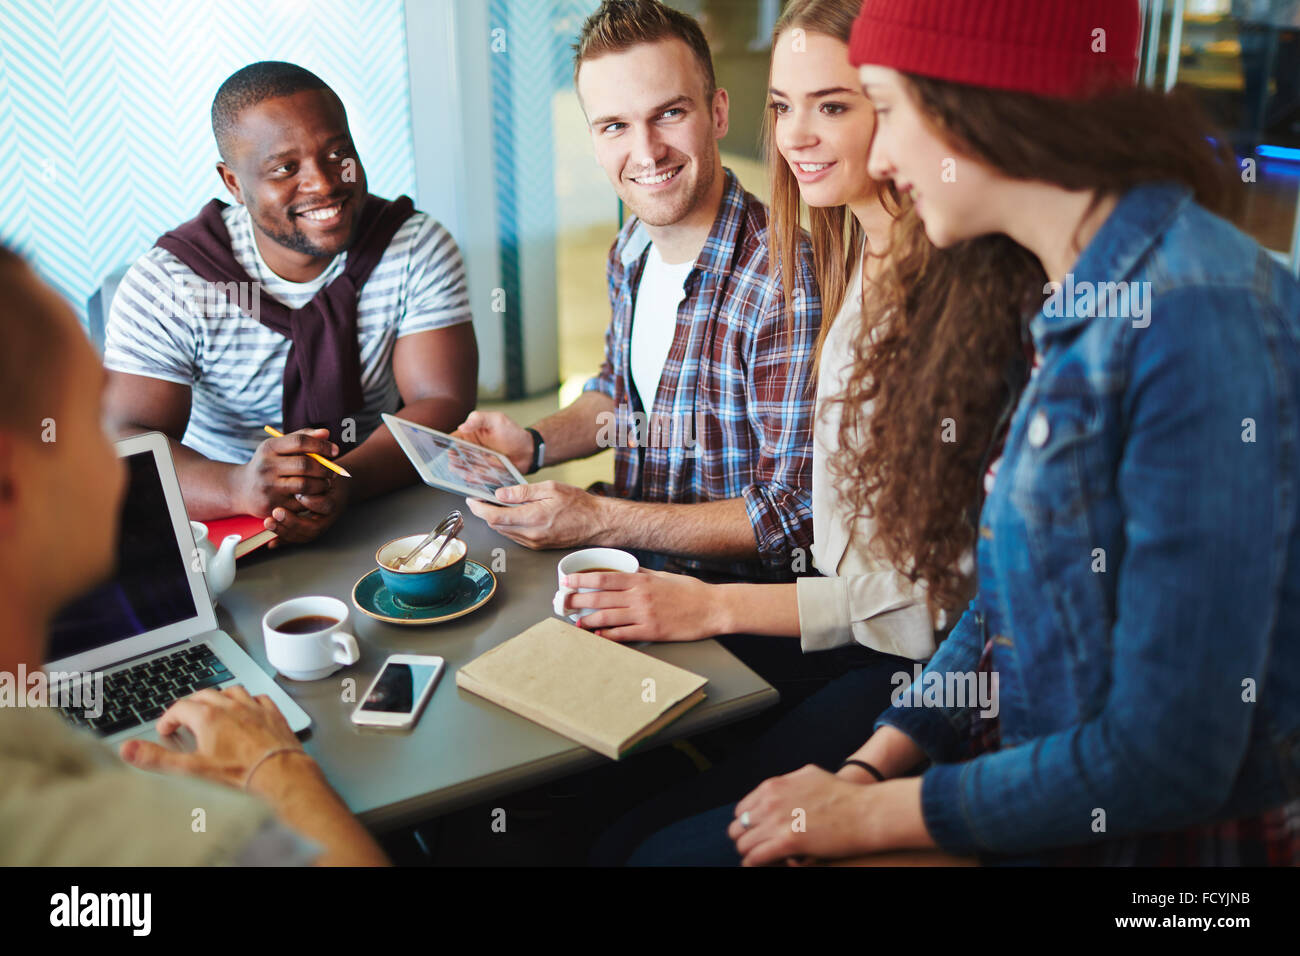 Modern teenagers working with gadgets and talking in cafe Stock Photo